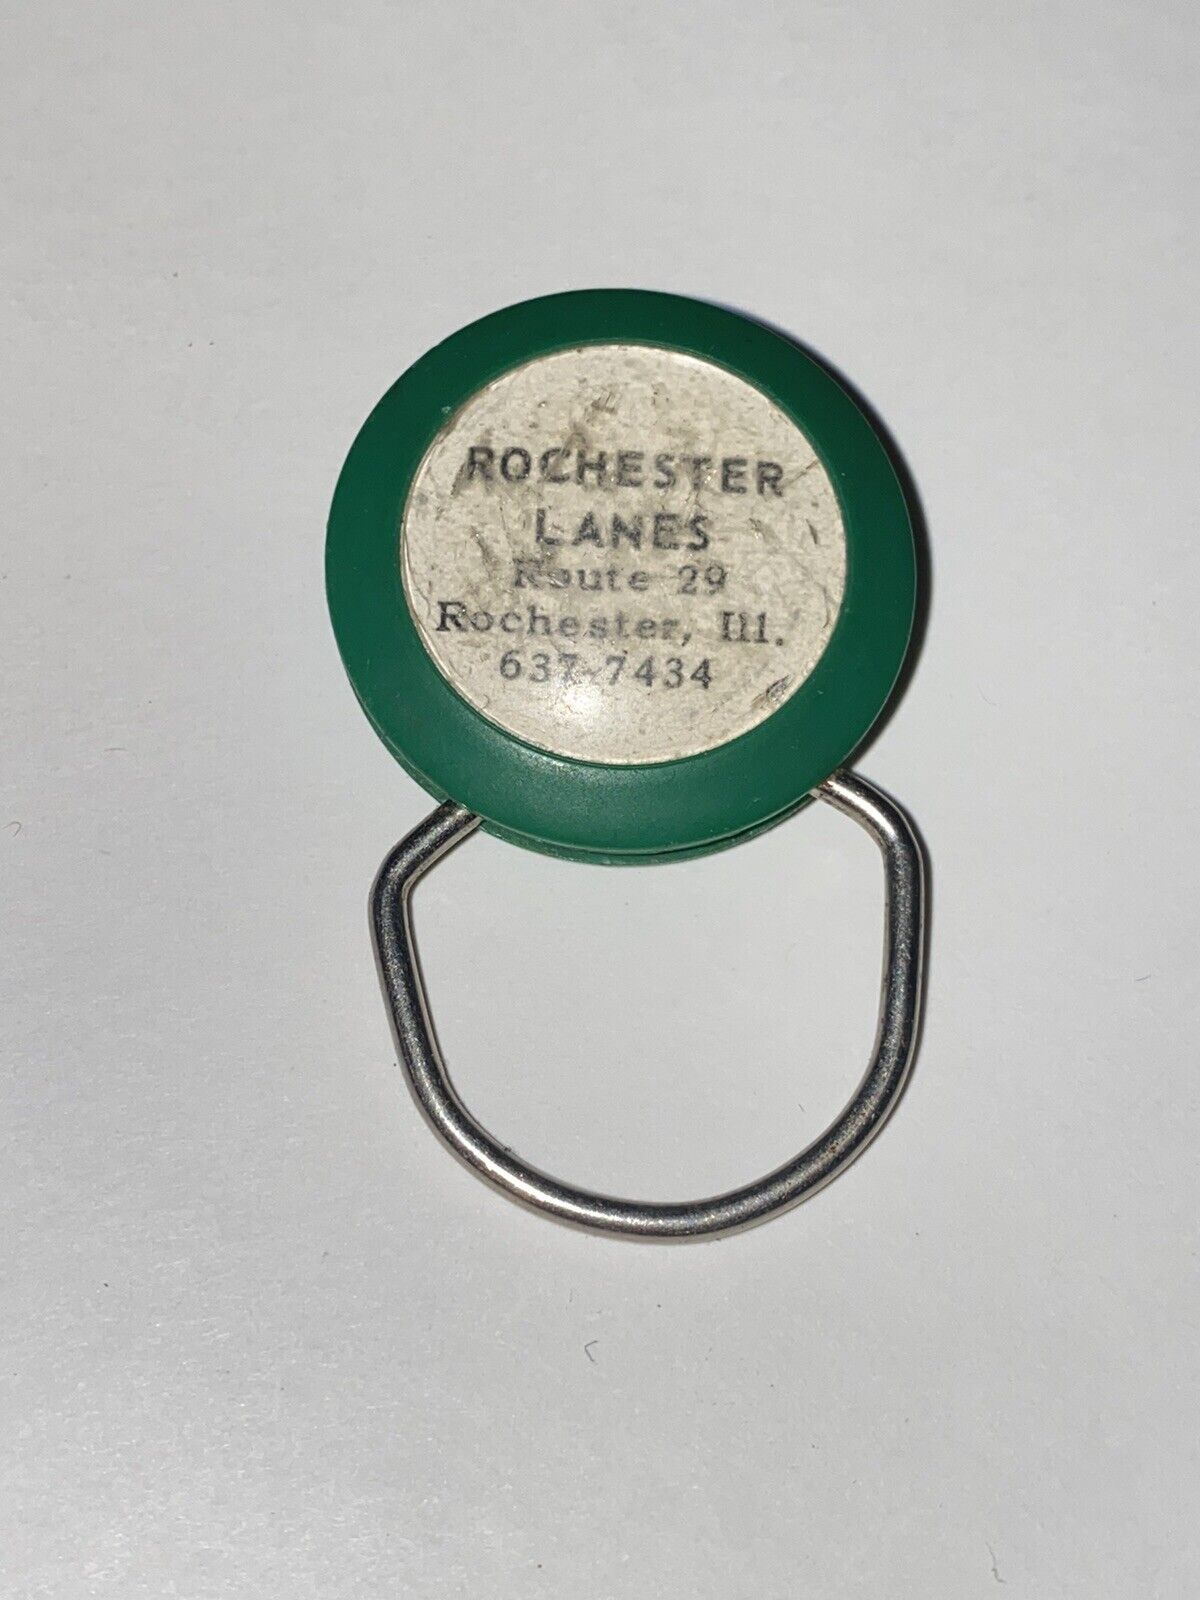 Rare Vintage Rochester Lanes Route 29 Rochester Illinois Advertising Key Ring